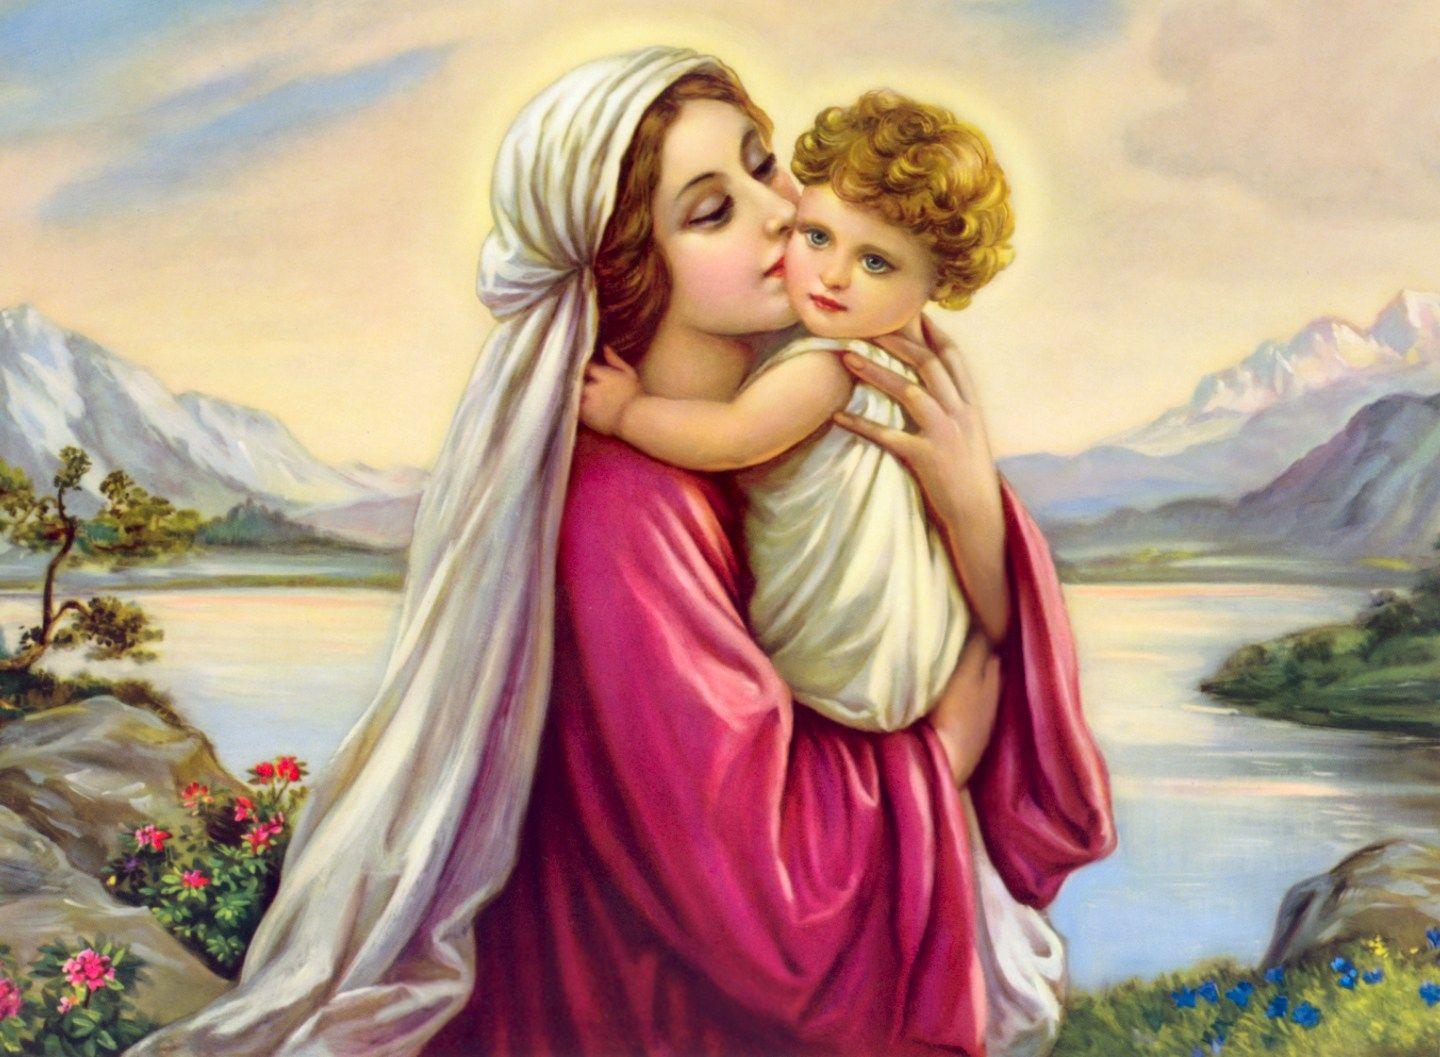 BEAUTIFUL MOTHER MARY'S WALLPAPERS